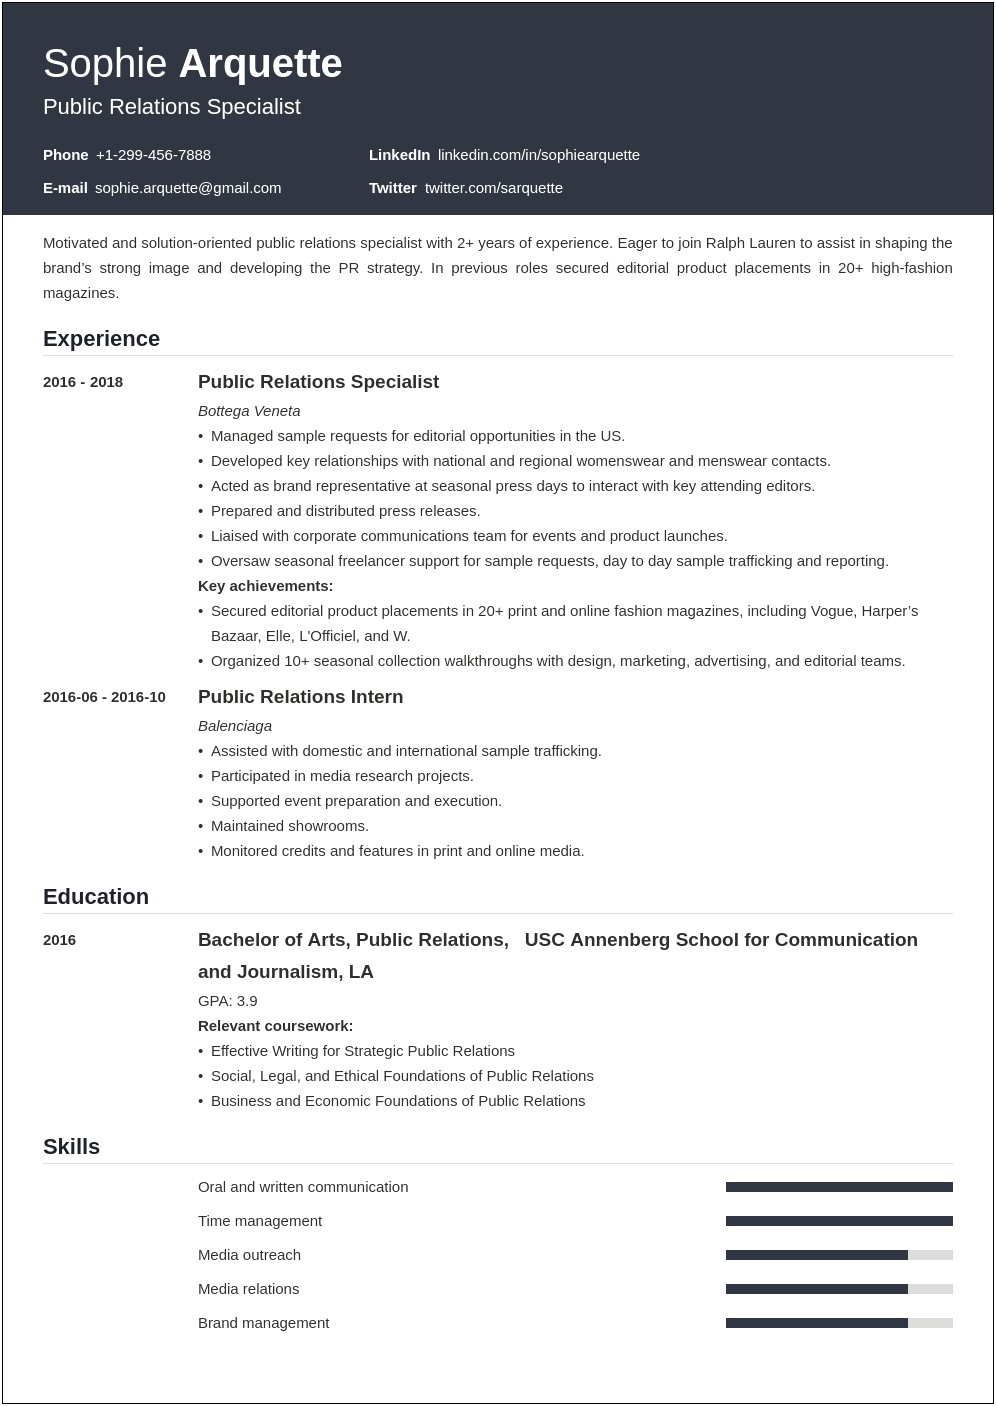 Resume Objectives For Public Service